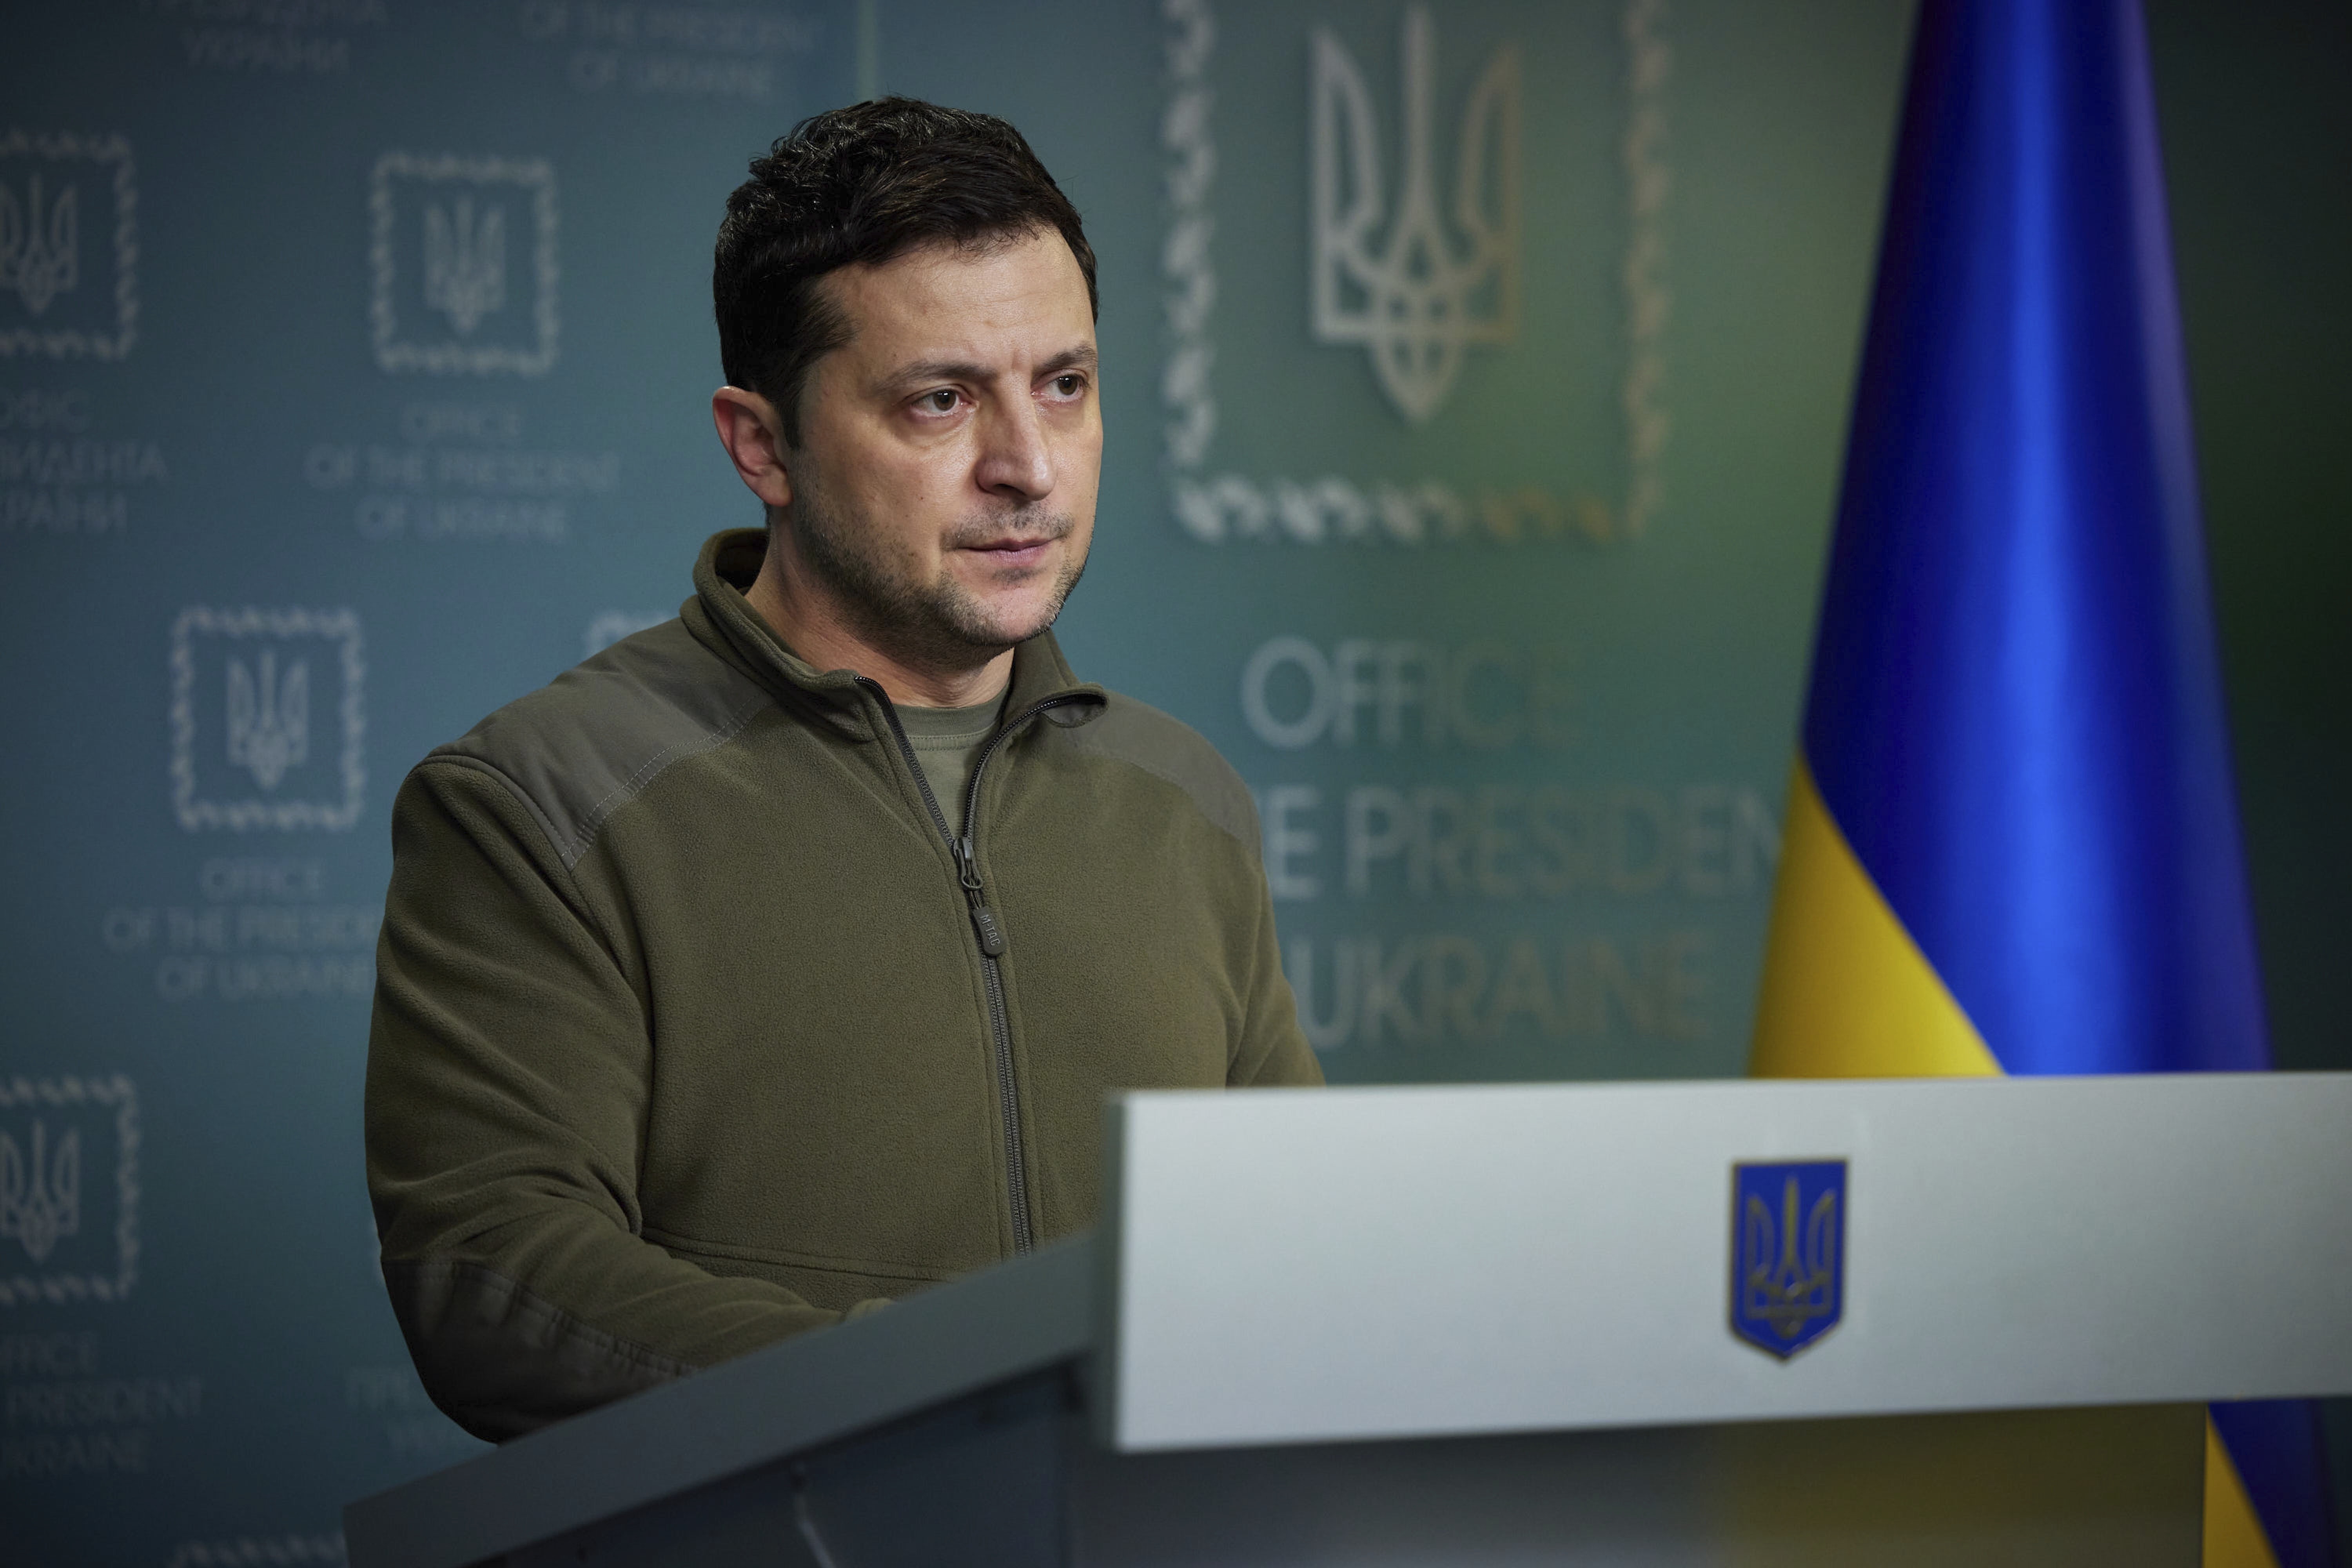 Ukrainian President Volodymyr Zelenskyy delivers his speech addressing the nation in Kyiv, Ukraine, Friday, Feb. 25, 2022. Russian troops bore down on Ukraine's capital Friday, with explosions and gunfire sounding in the city as the invasion of a democratic country fuelled fears of wider war in Europe and triggered new international efforts — including direct sanctions on President Vladimir Putin — to make Moscow stop.